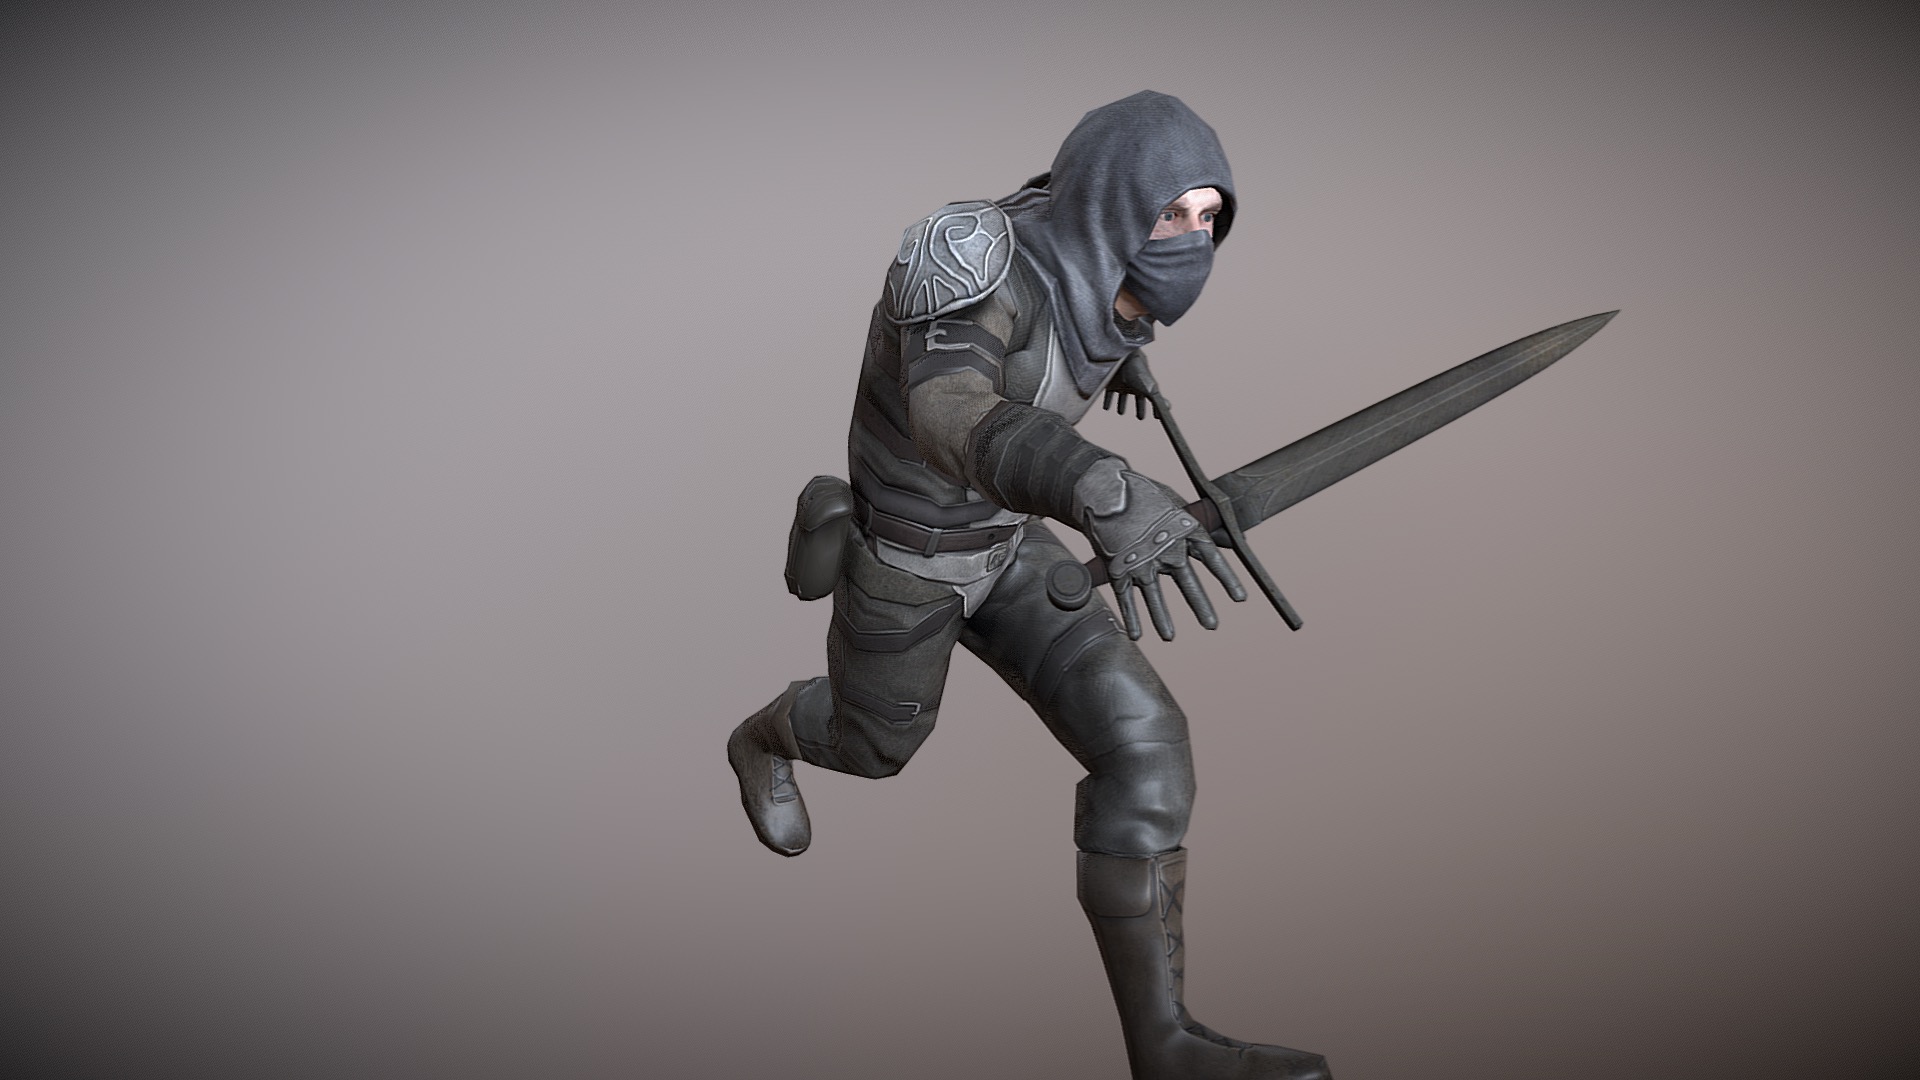 3D model Thief - This is a 3D model of the Thief. The 3D model is about a man in a garment holding a sword.